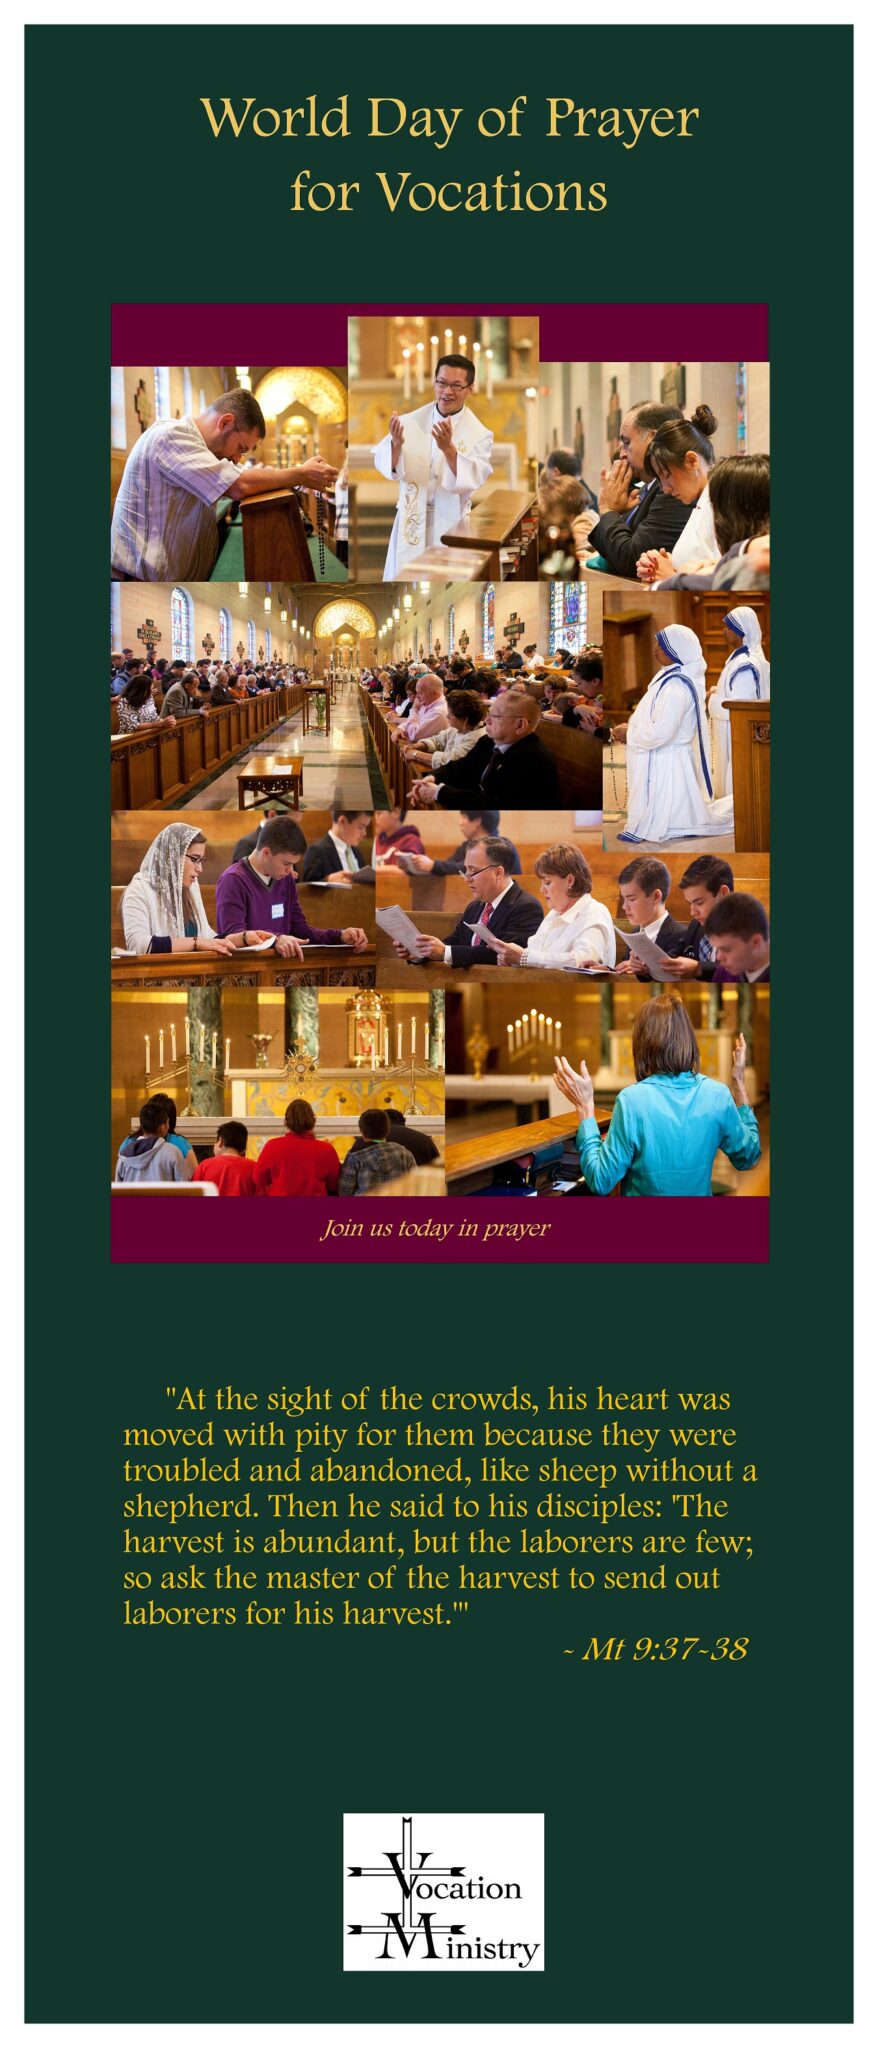 World Day of Prayer for Vocations Diocese of Reno